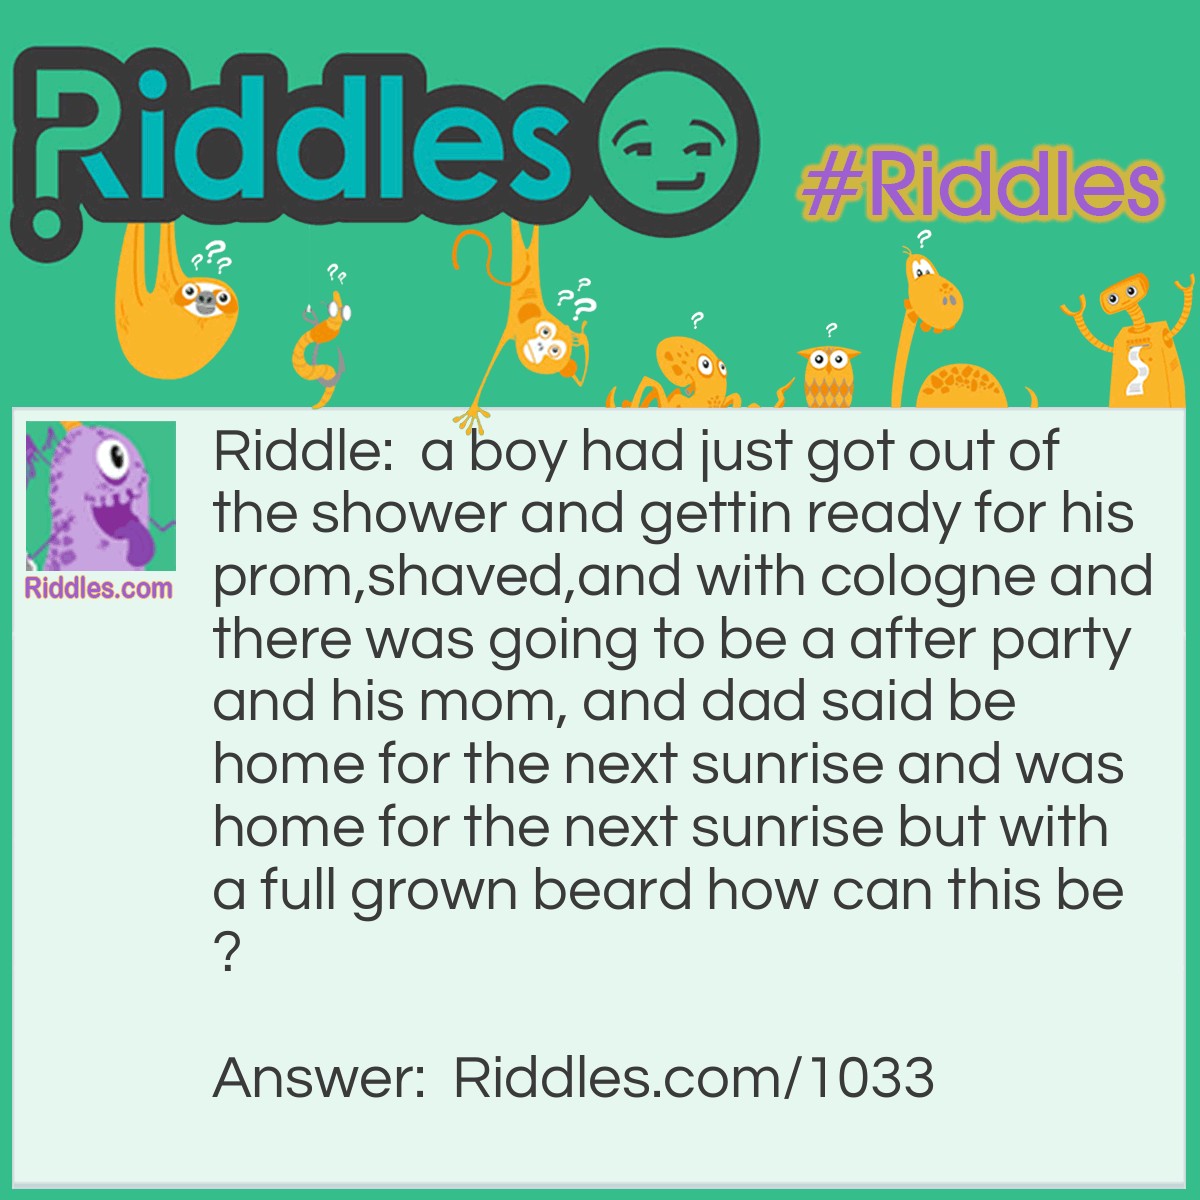 Riddle: A boy had just got out of the shower and getting ready for his prom, shaved, and with cologne and there was going to be an after-party, and his mom, and dad said to be home for the next sunrise and was home for the next sunrise but with a full-grown beard. How can this be? Answer: He lives in Alaska and sunrises are every six months.